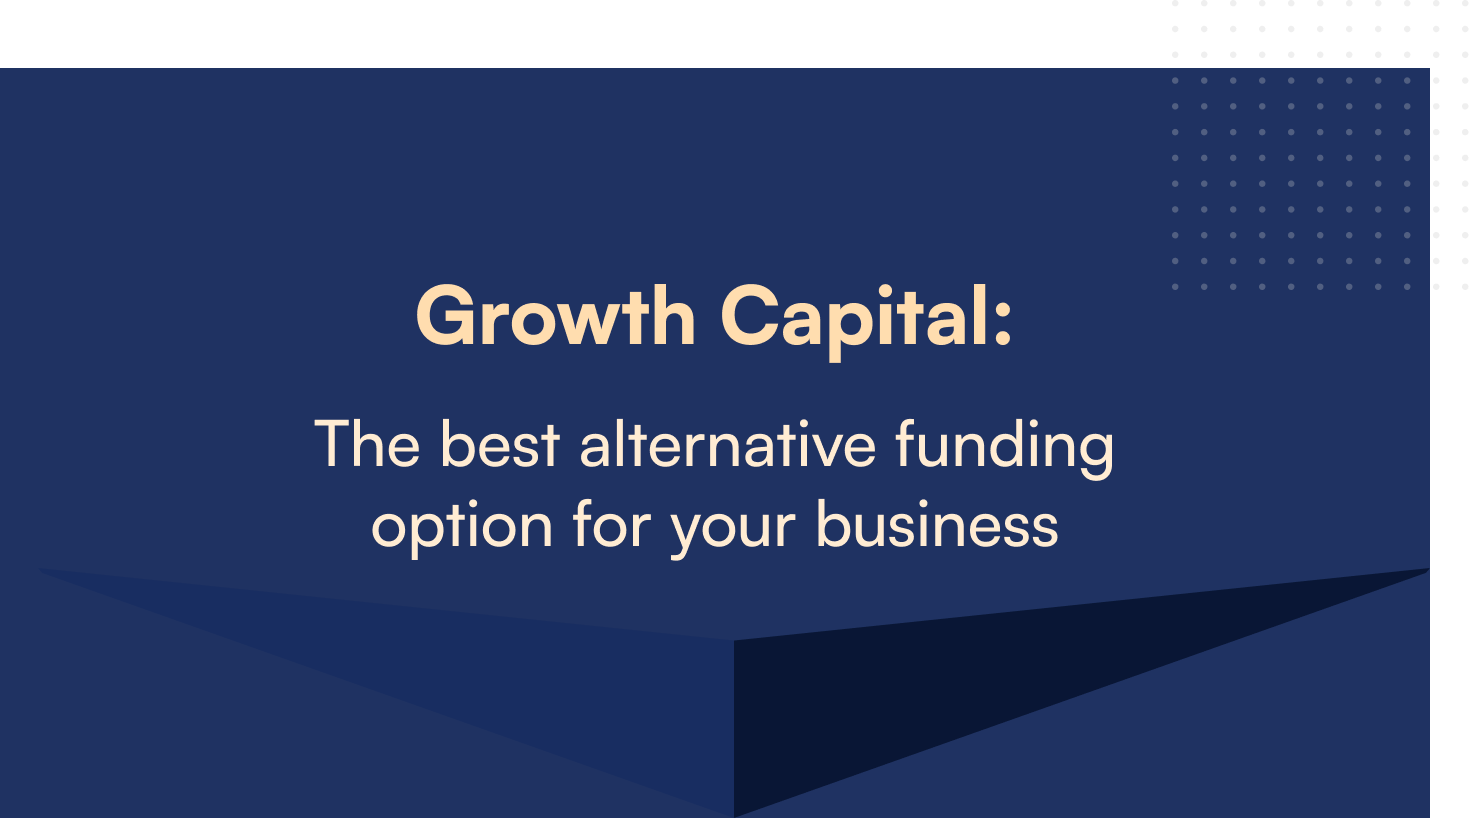 Growth Capital: The best alternative funding option for your business